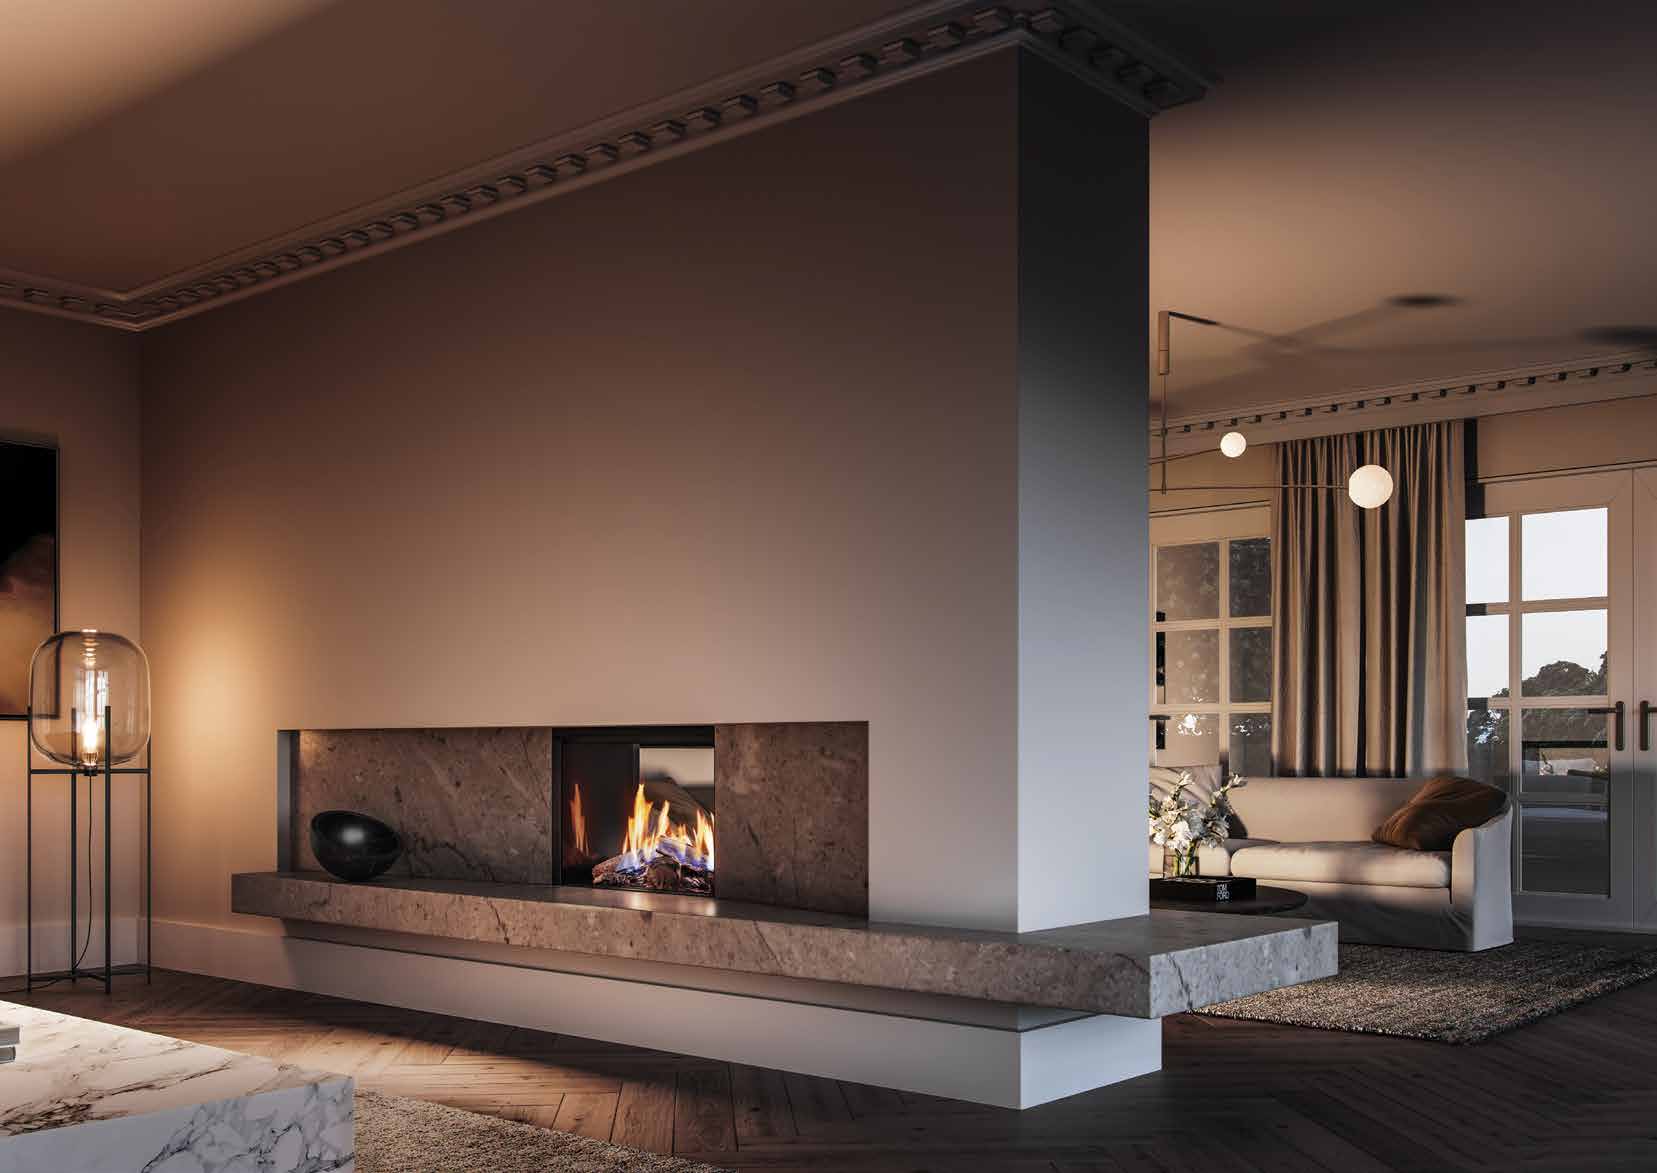 Gas fireplace in the living room